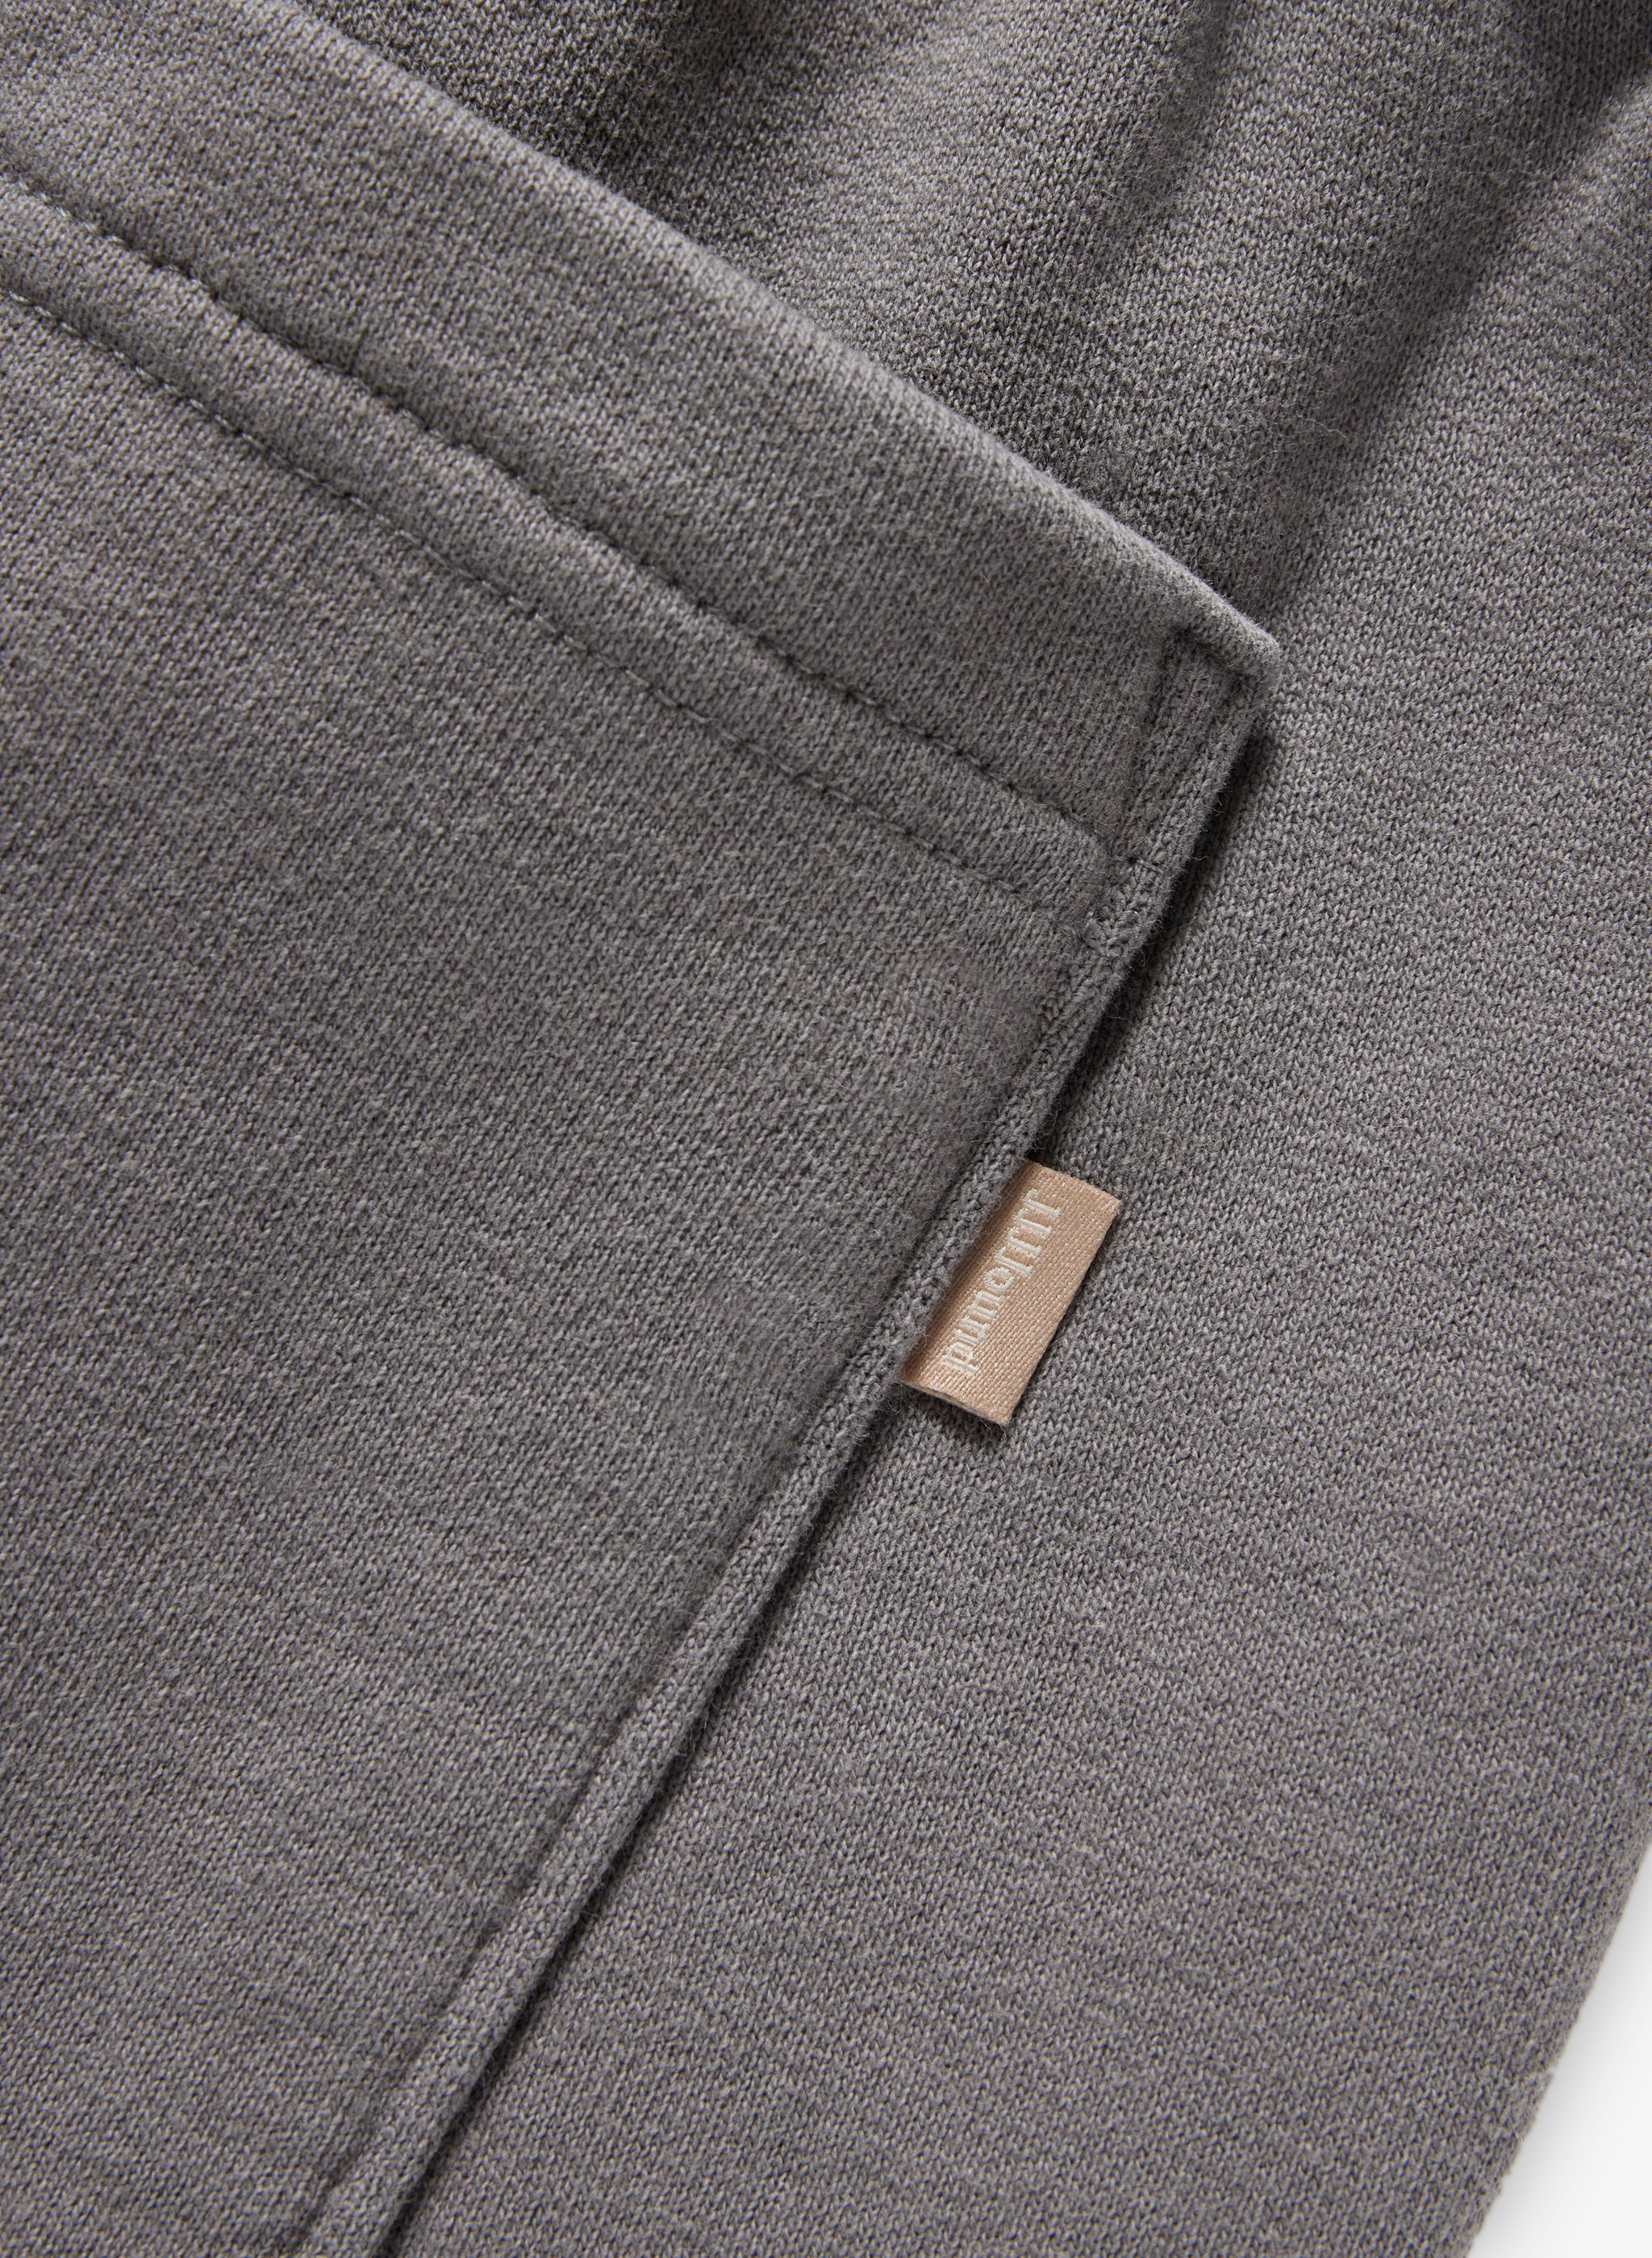 J90 Sweatpants - Charcoal French Terry